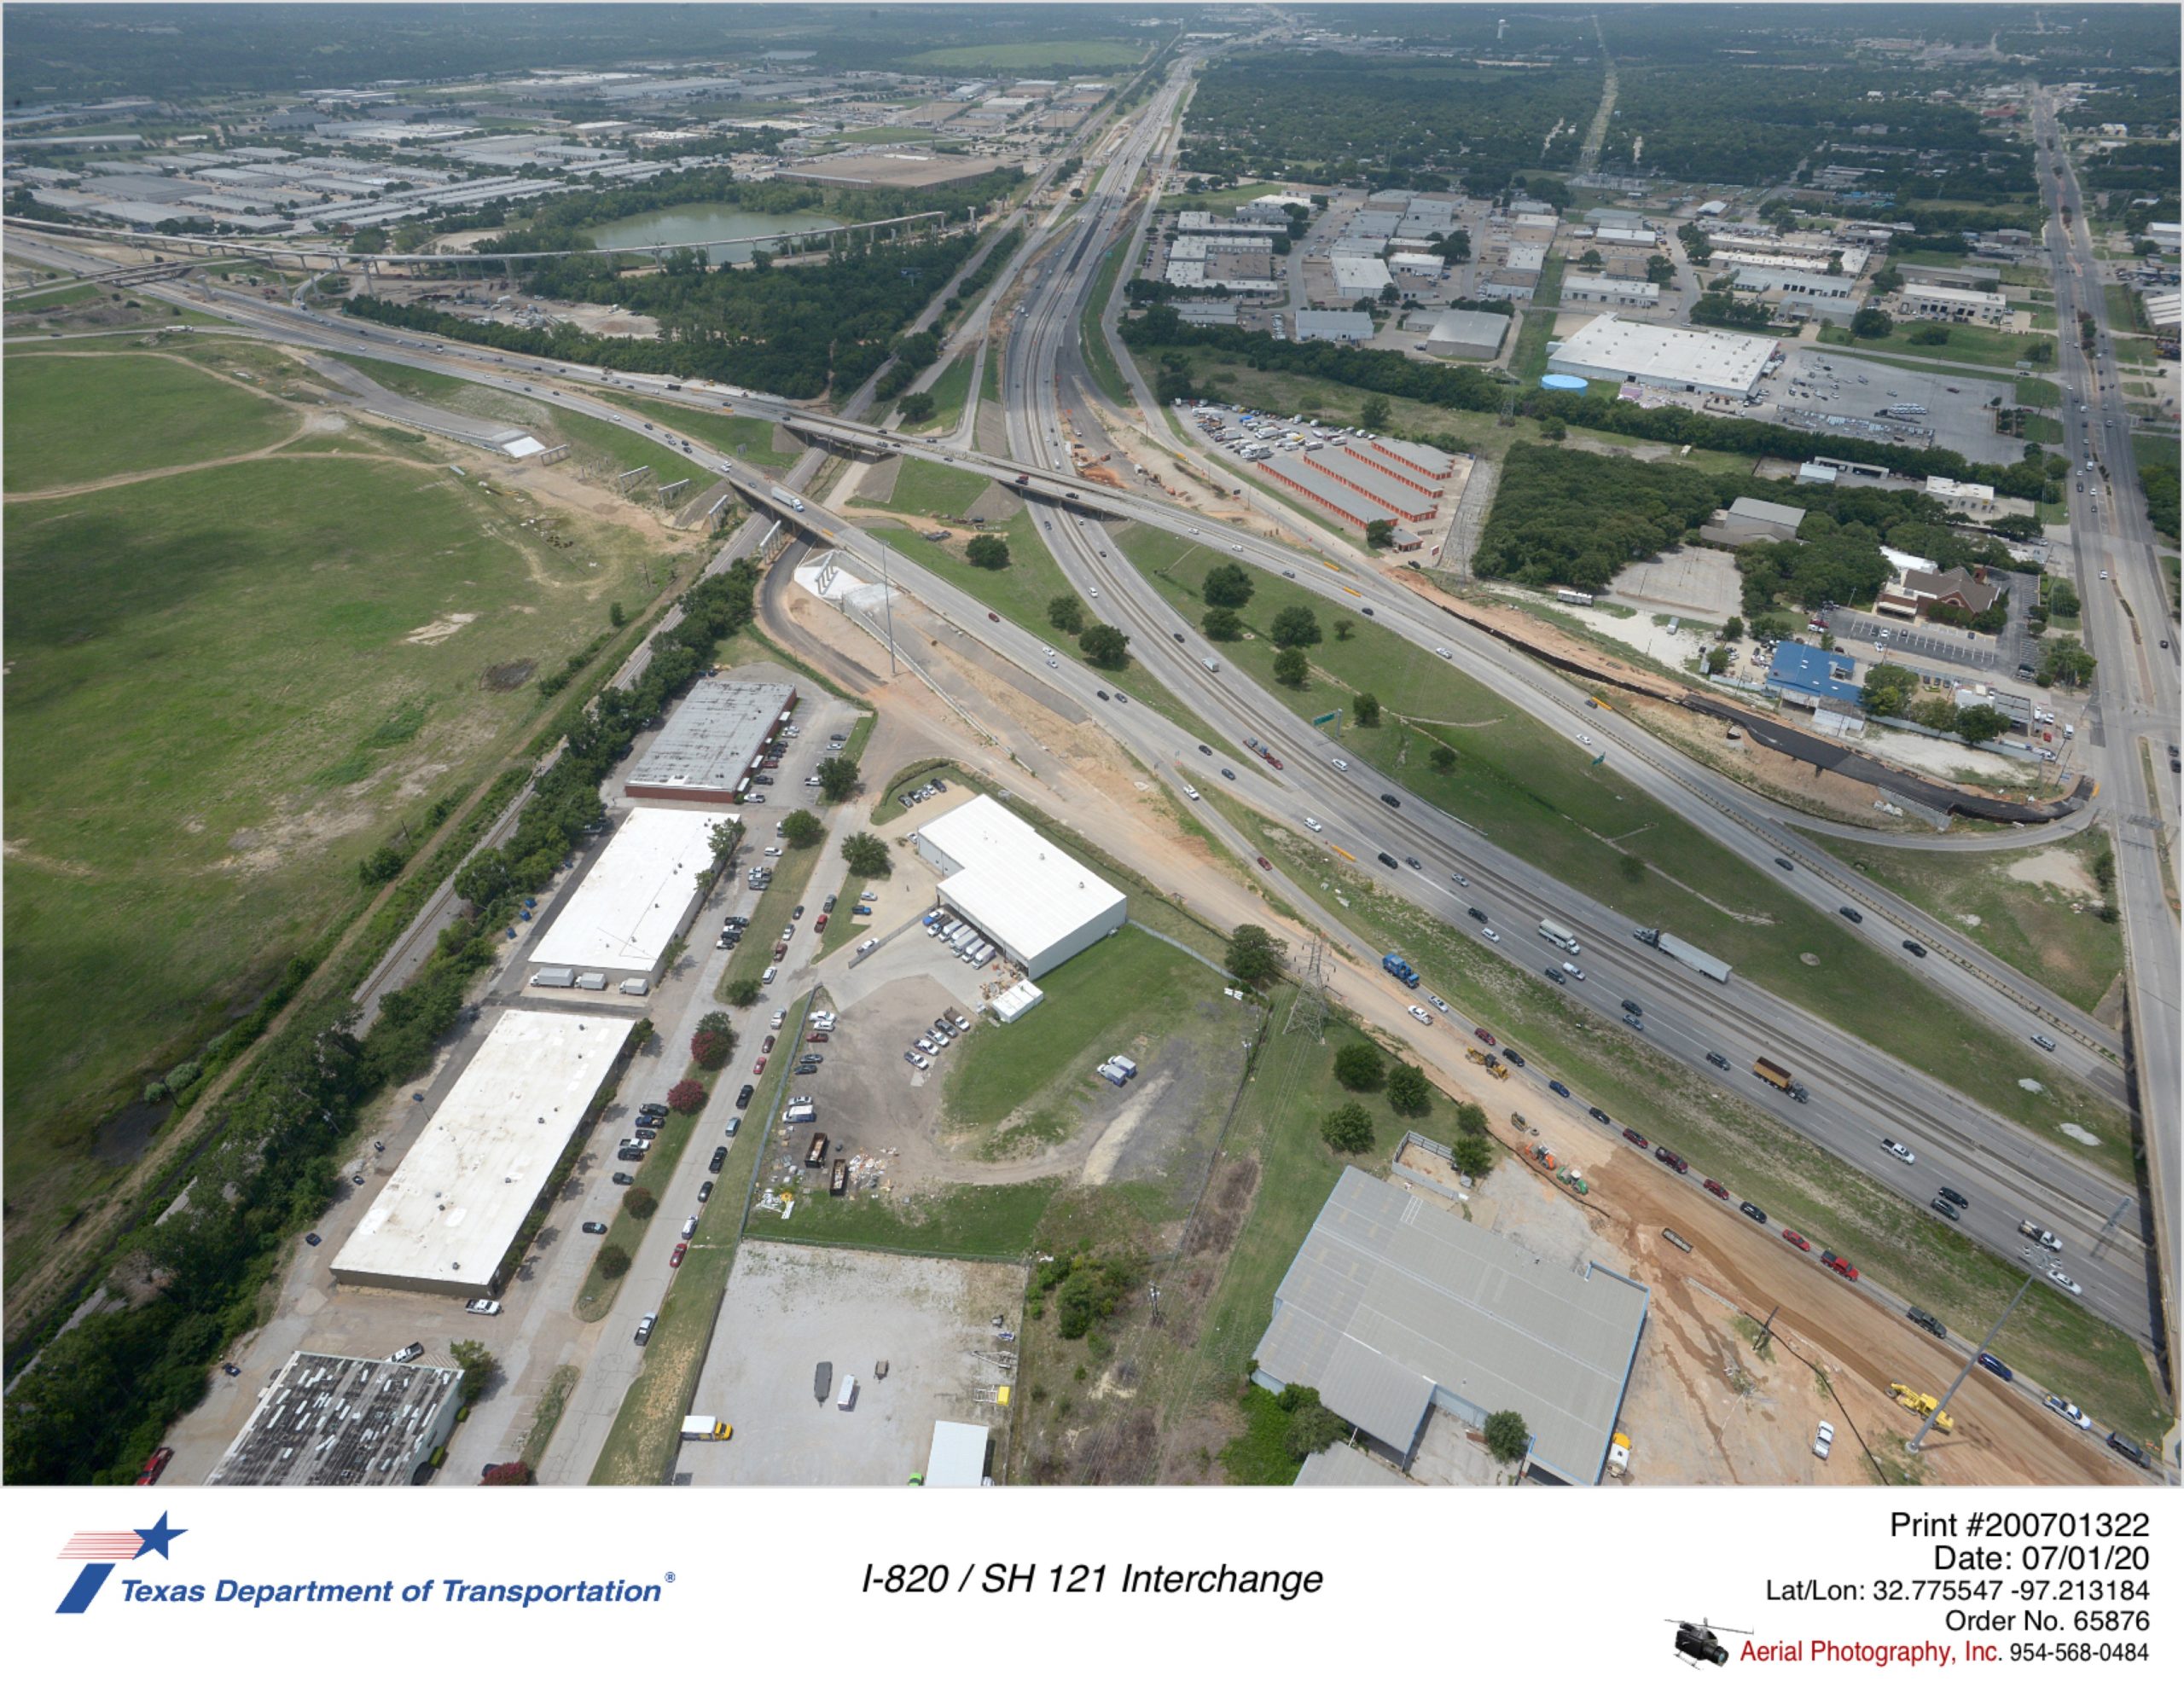 Looking southwest over I-820/SH 121 interchange. Construction of northbound frontage road shown.